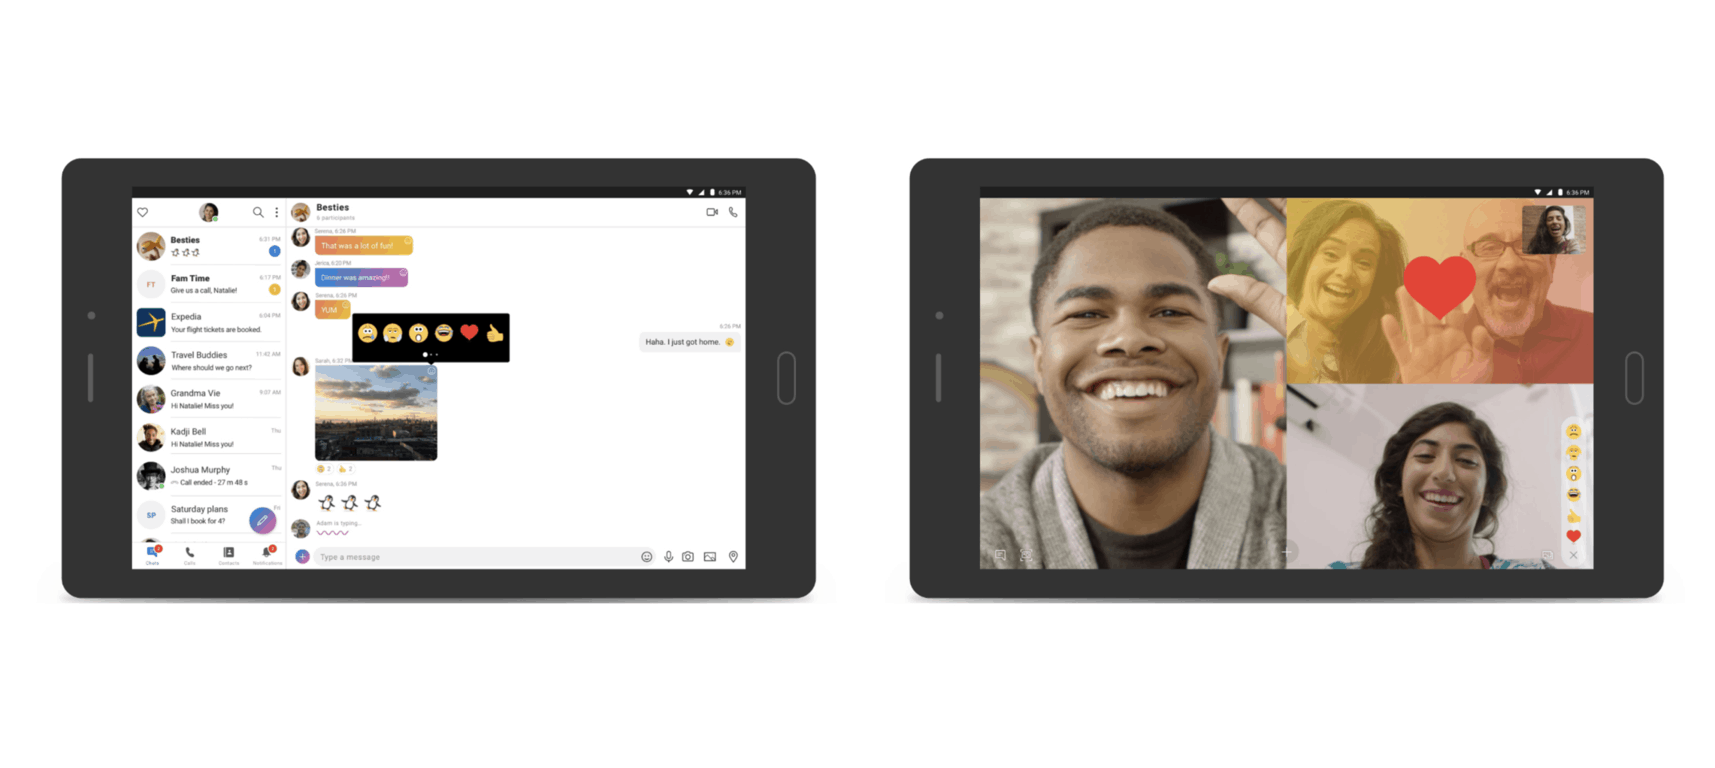 Skype’s redesigned app is now available in preview on Android tablets - OnMSFT.com - June 19, 2018